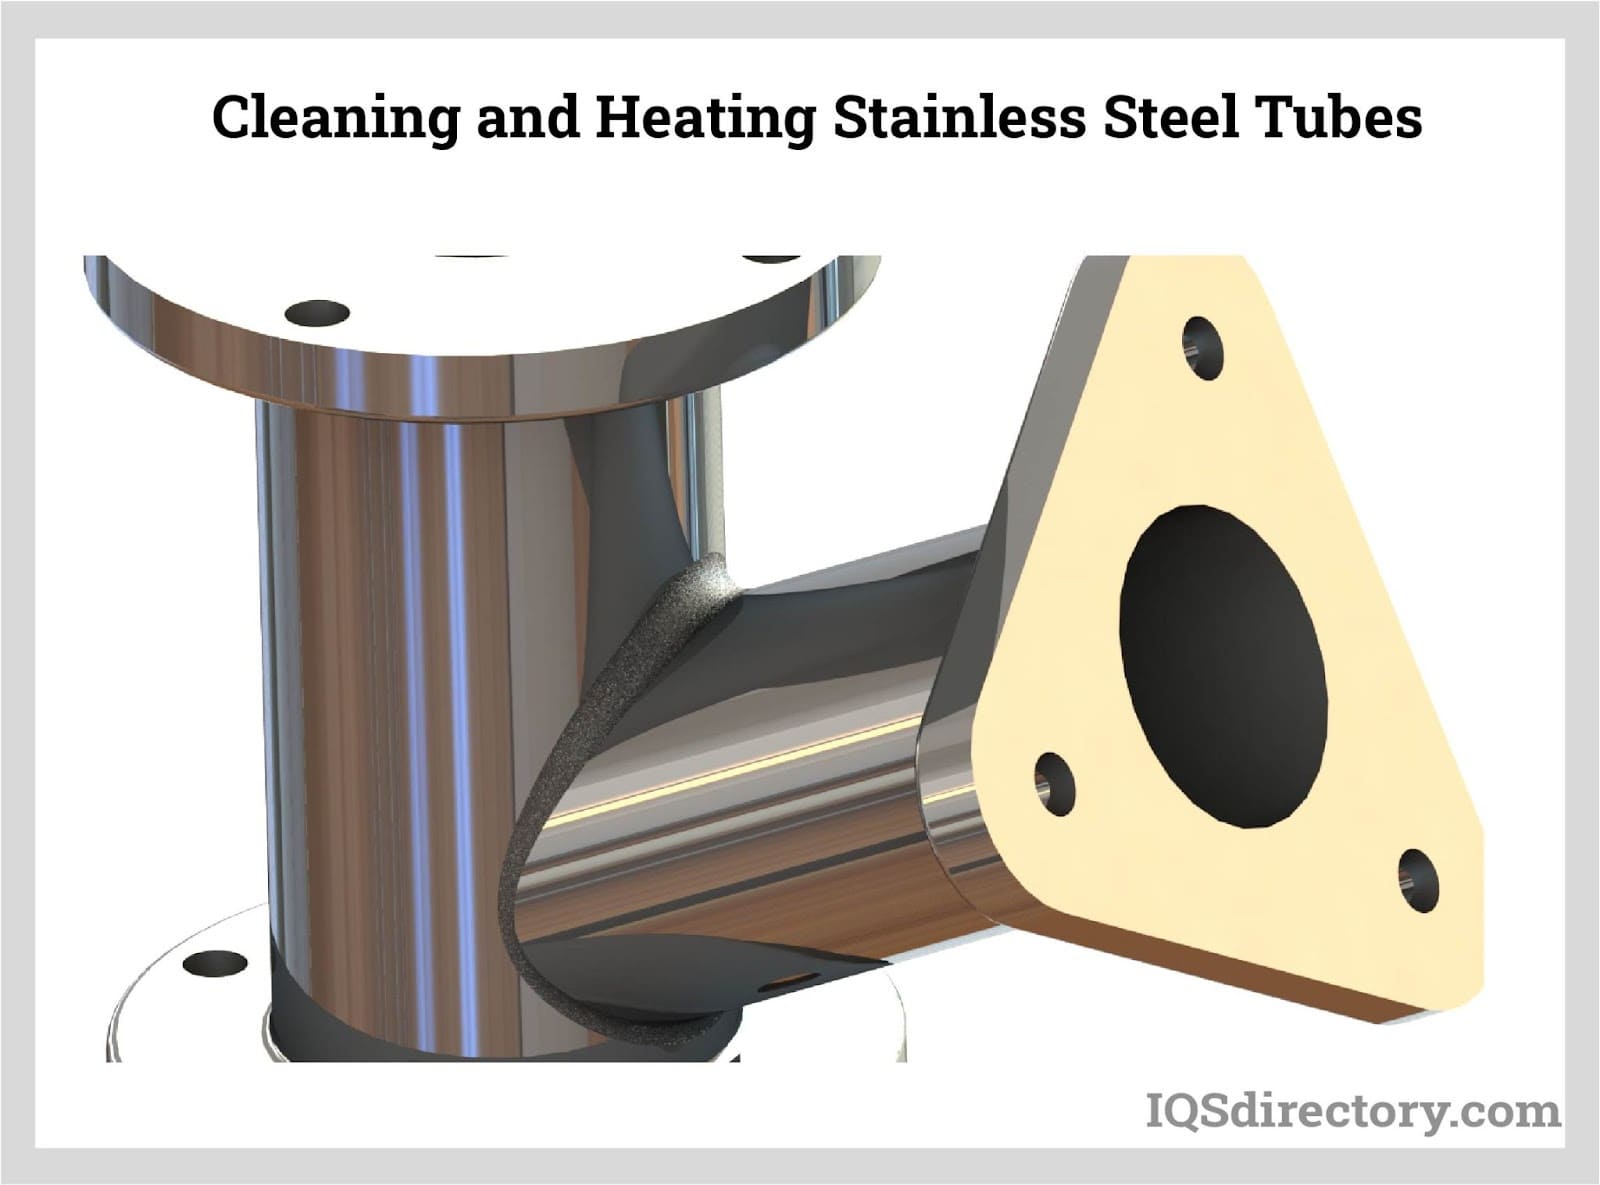 Cleaning and Heating Stainless Steel Tubes